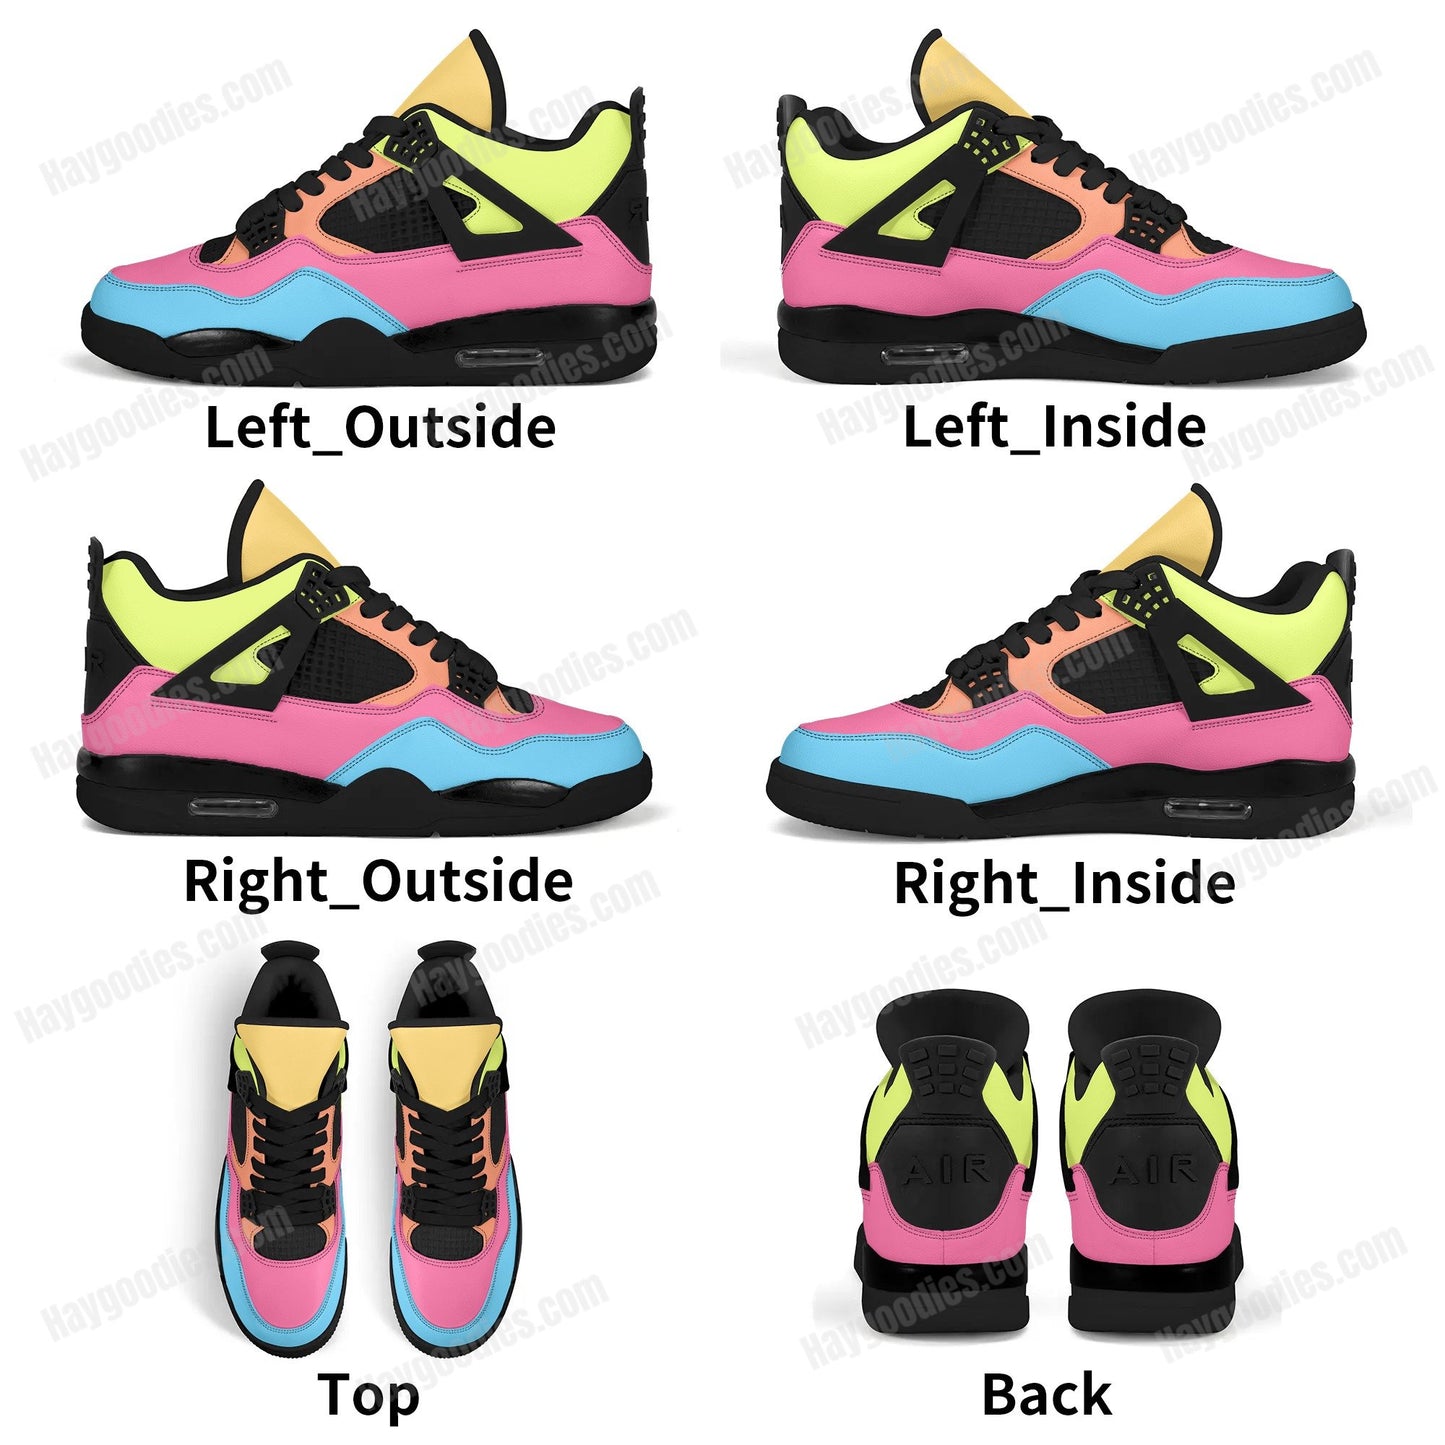 Cute Bright Retro Low Top J4 Style Sneakers